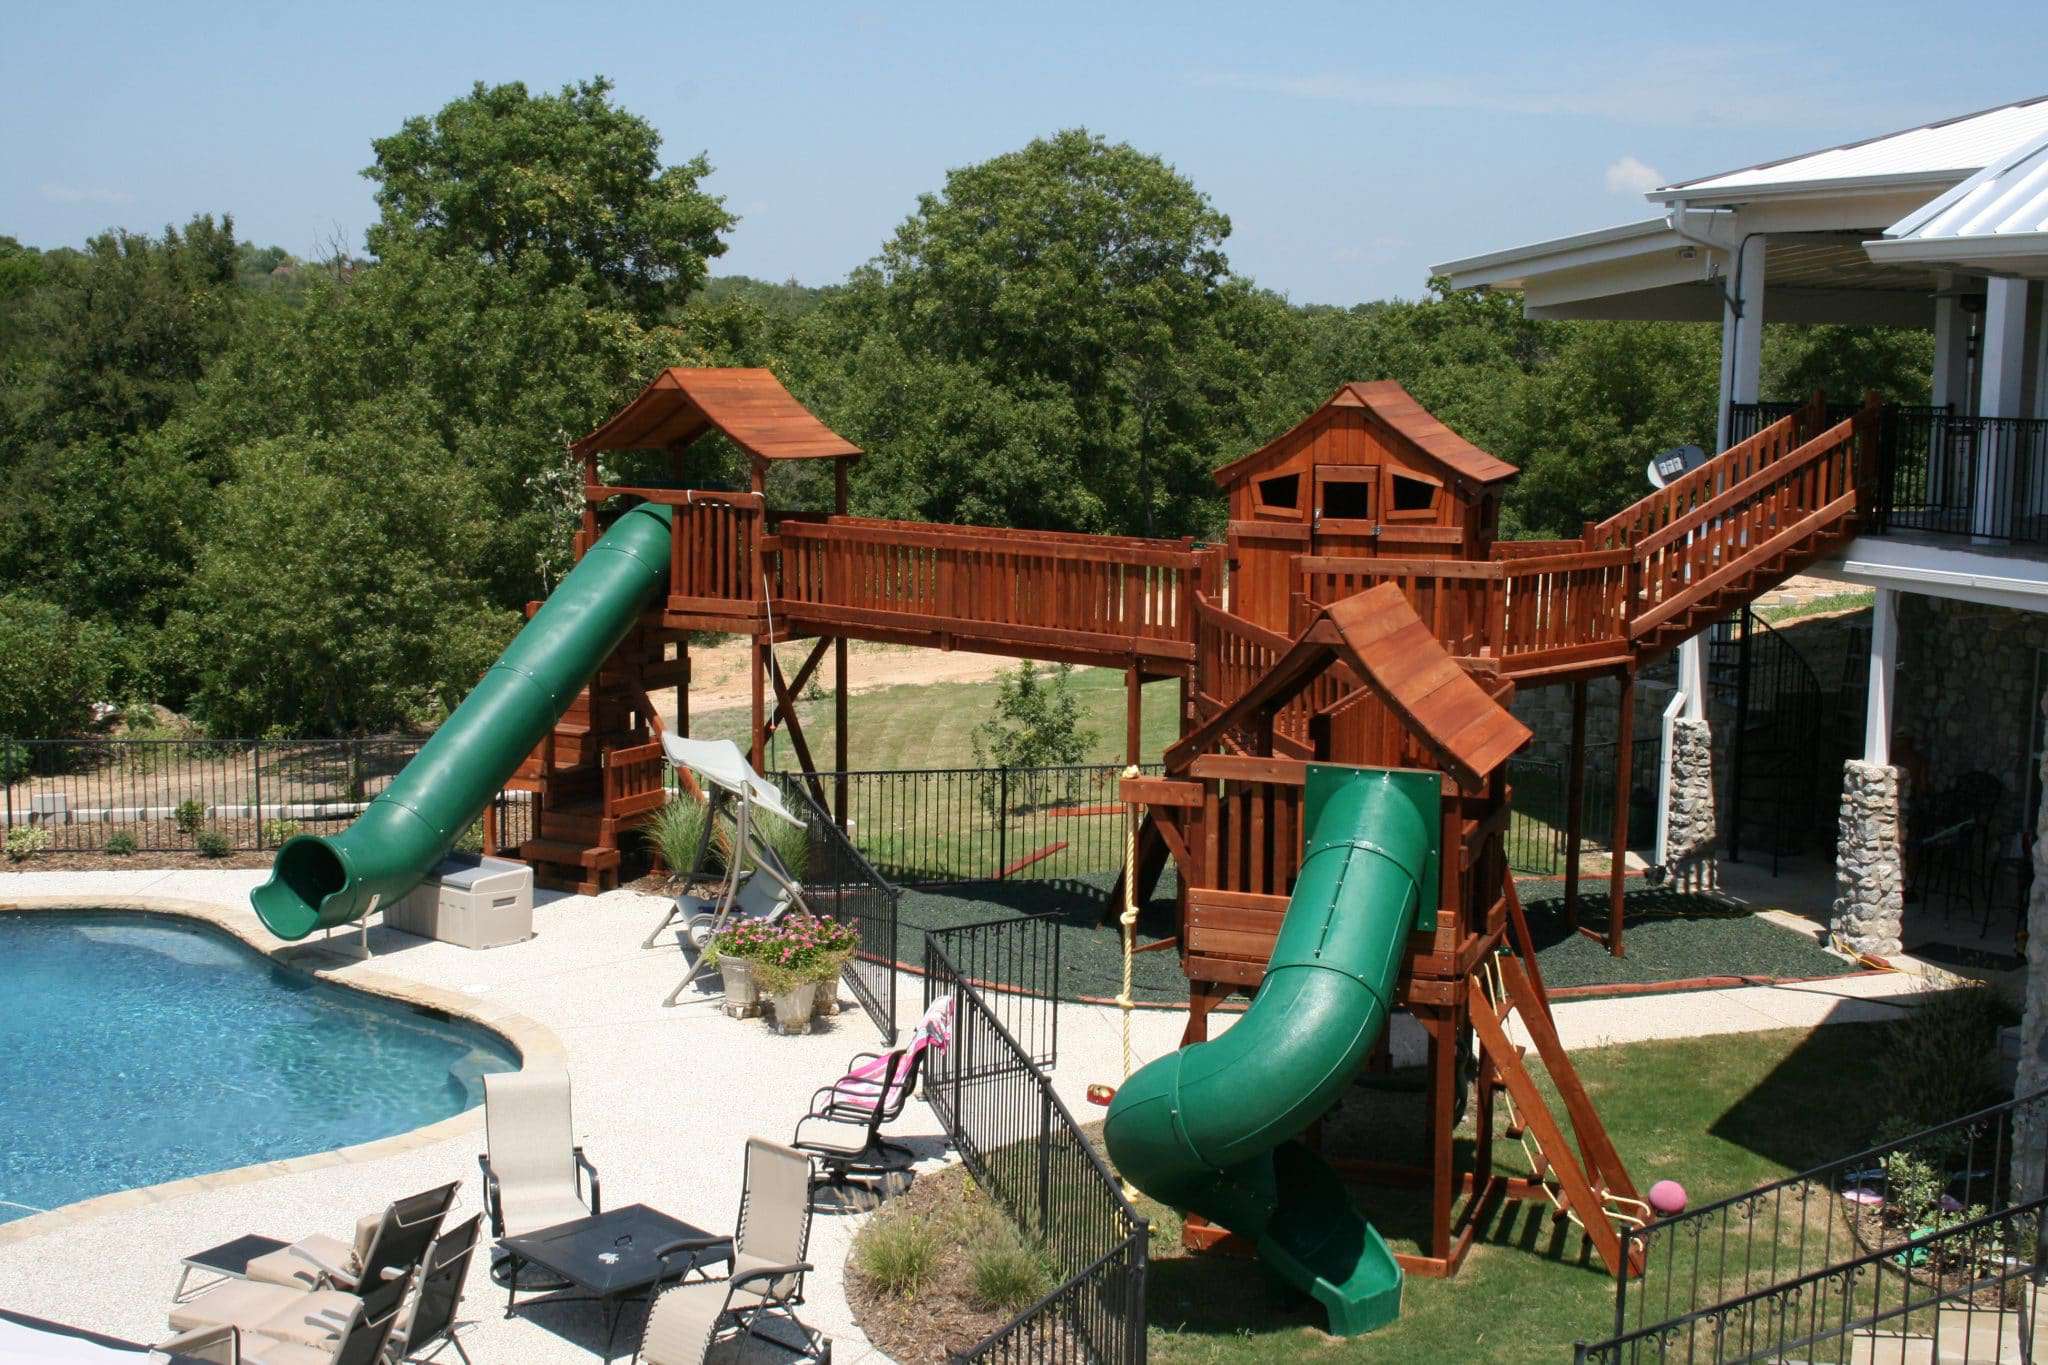 financing, playset bridged to second balcony of home with slides going into pool